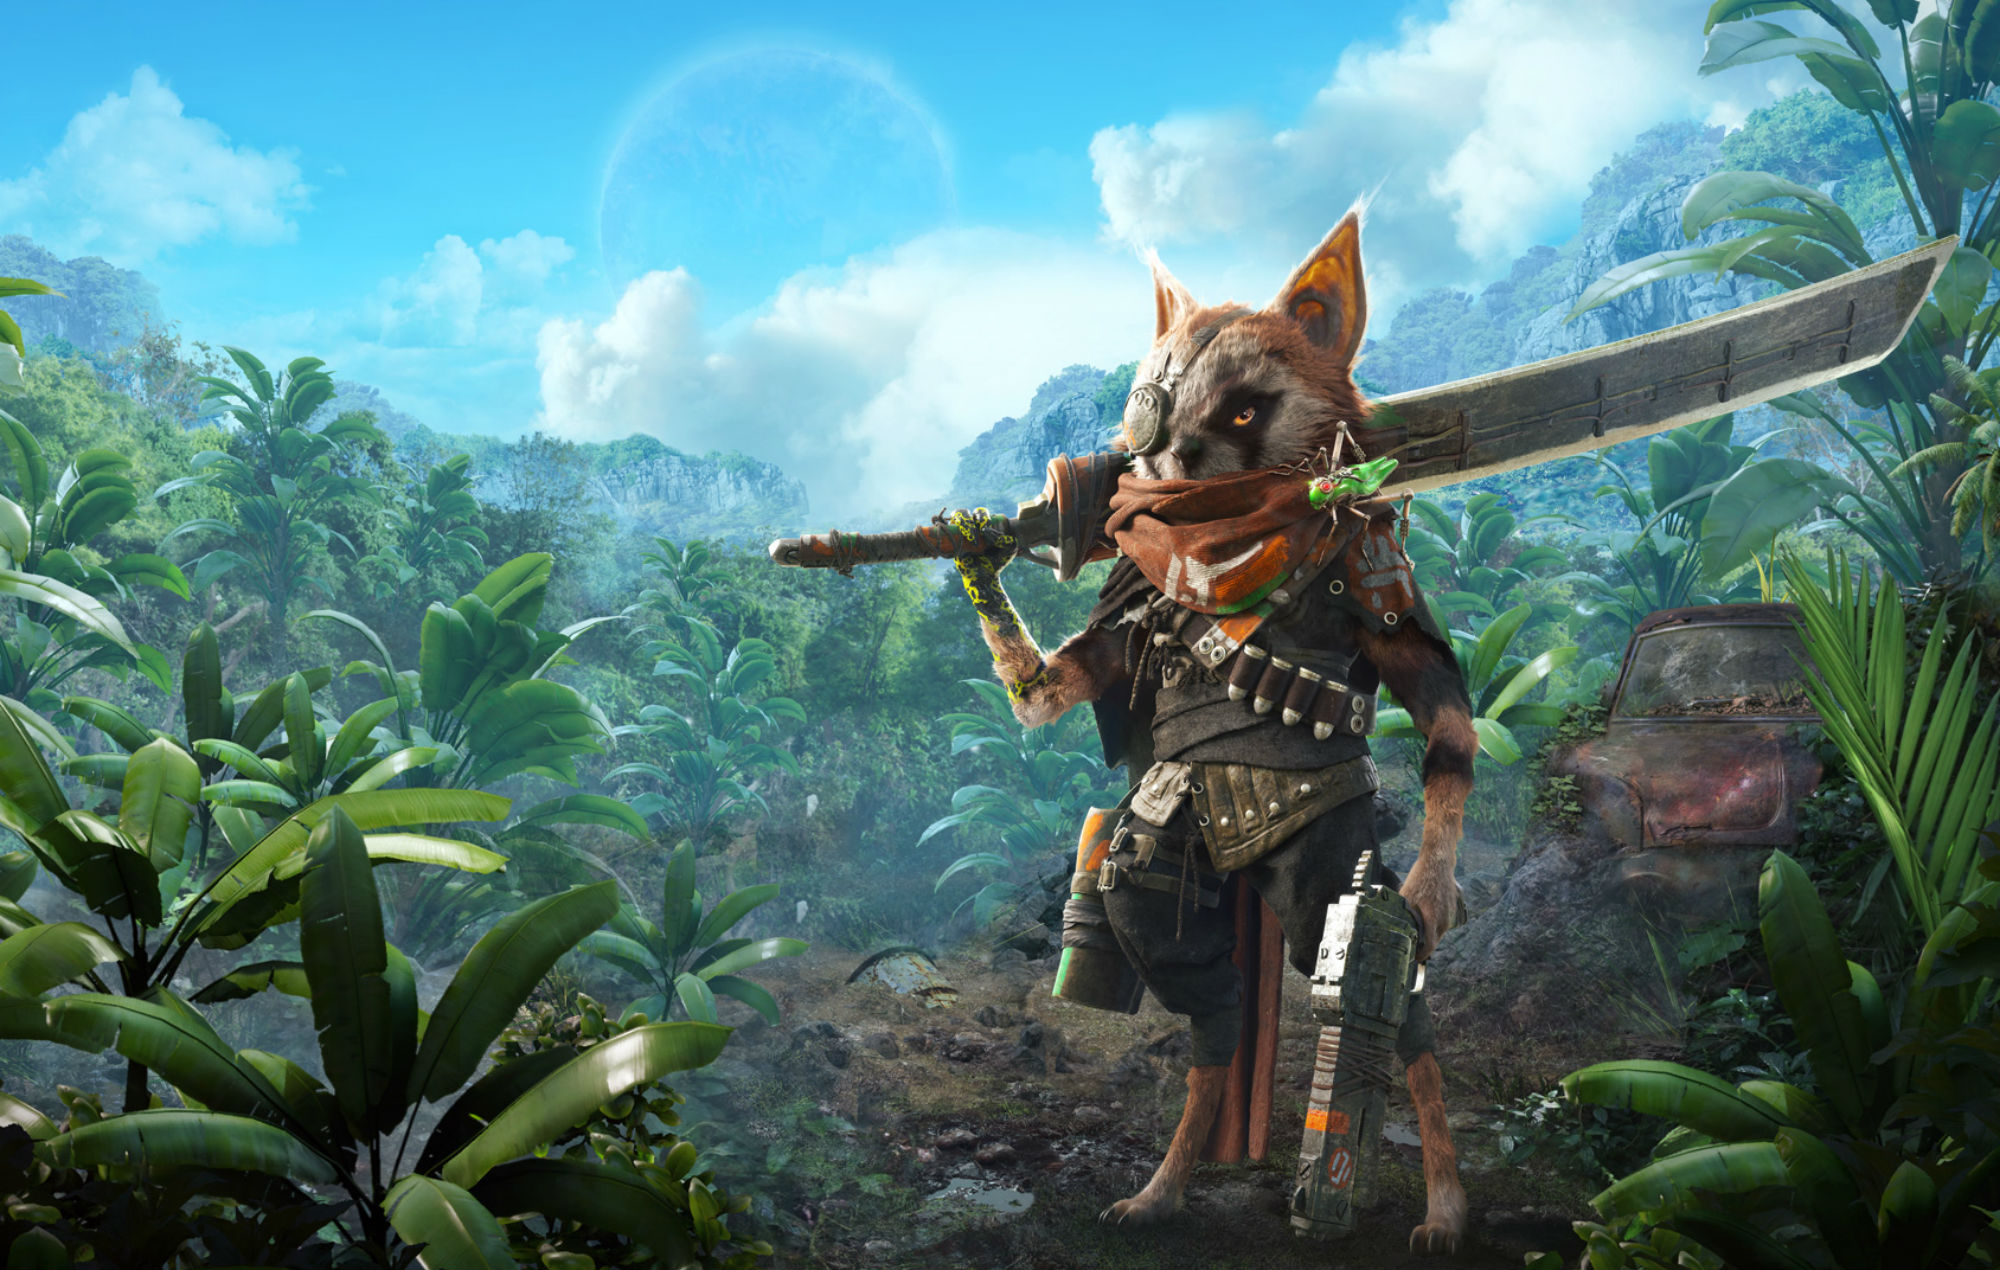 It’s a racoon, it’s a cat, it’s a Biomutant, and it’s out now